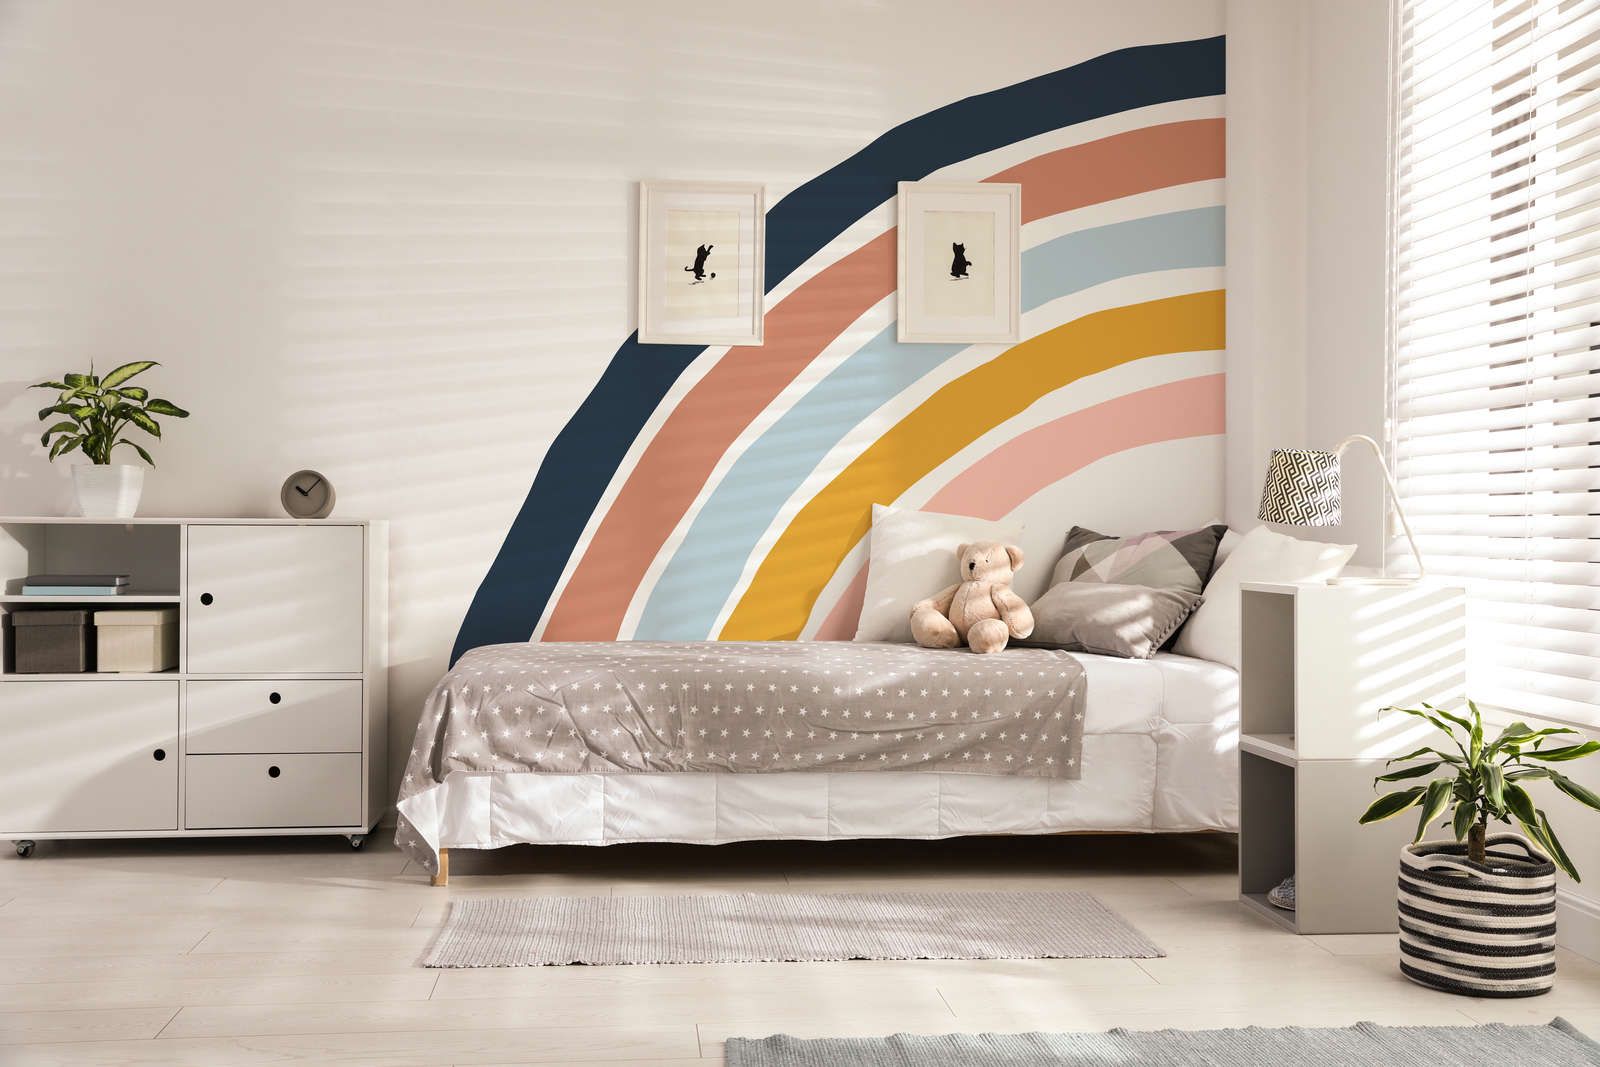             Nursery mural with painted rainbow - Smooth & slightly shiny non-woven
        